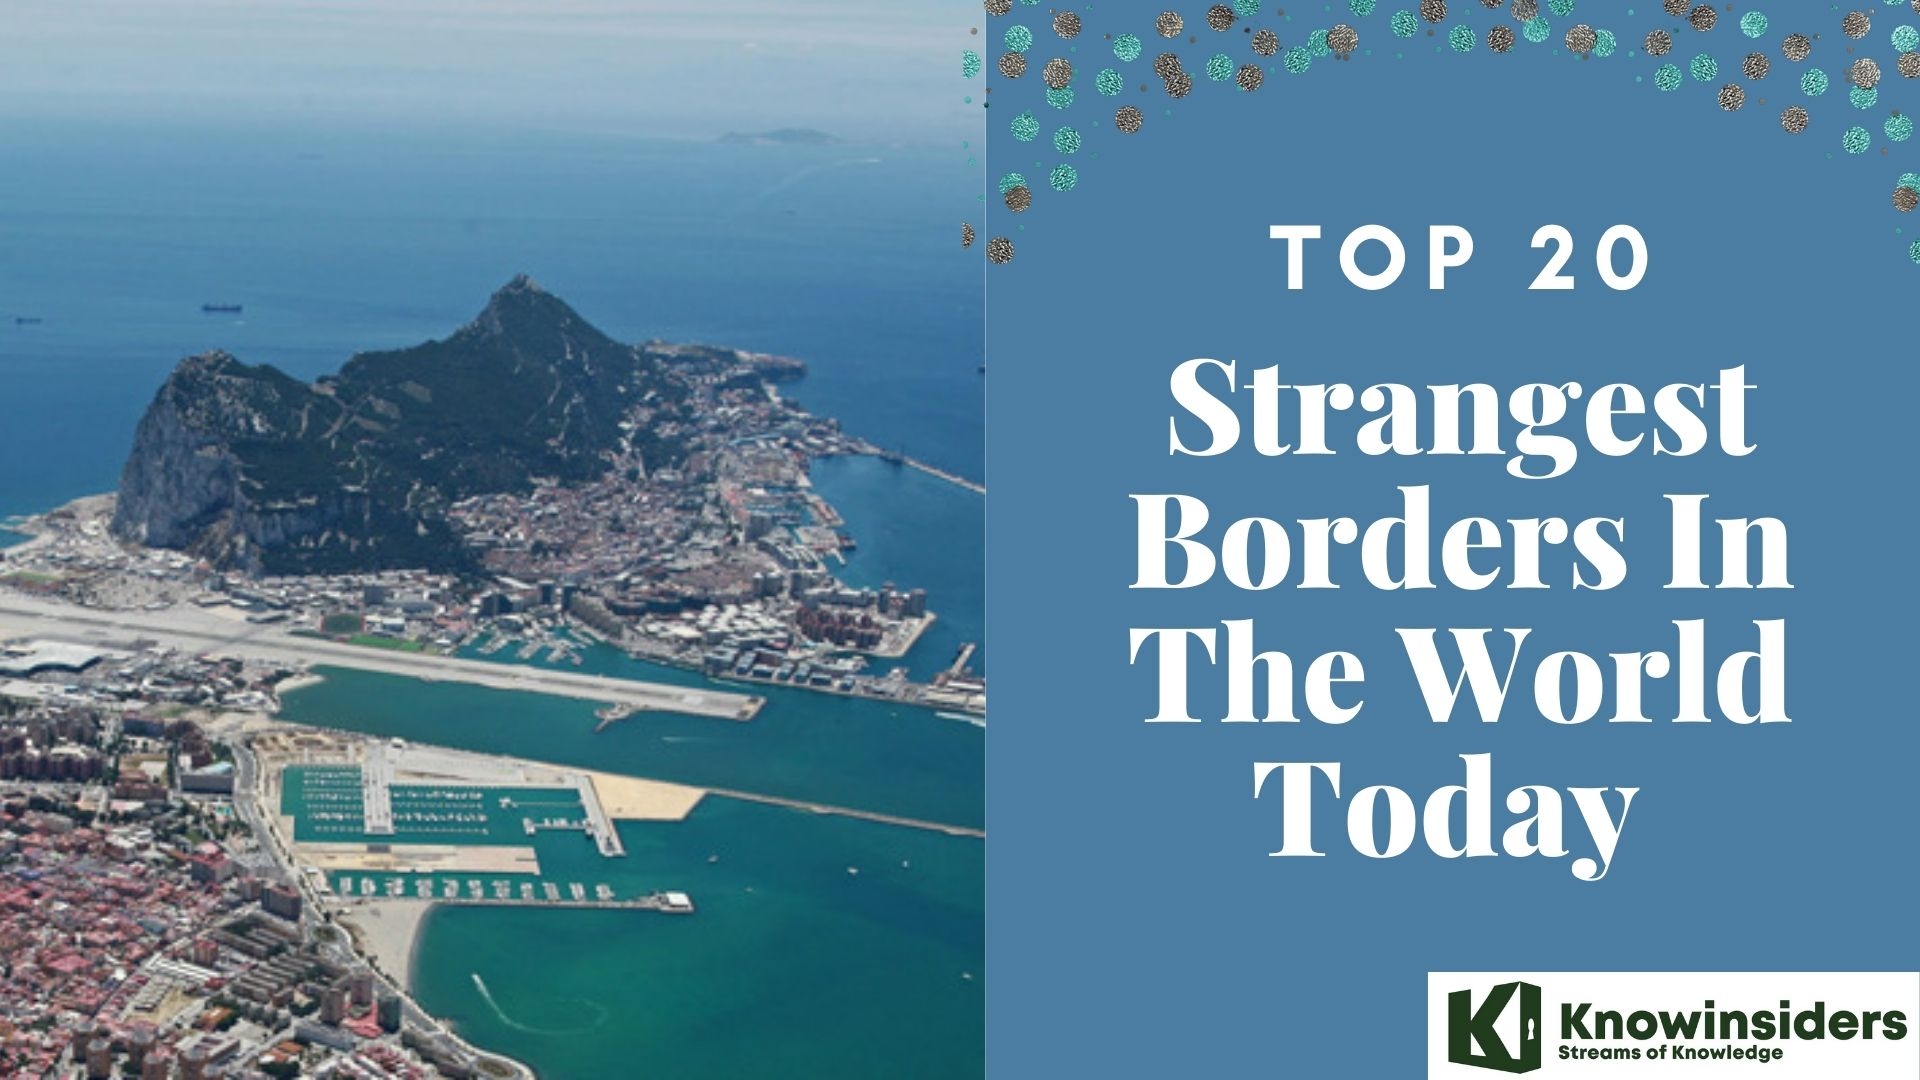 Top 20 Strangest Borders In The World Today